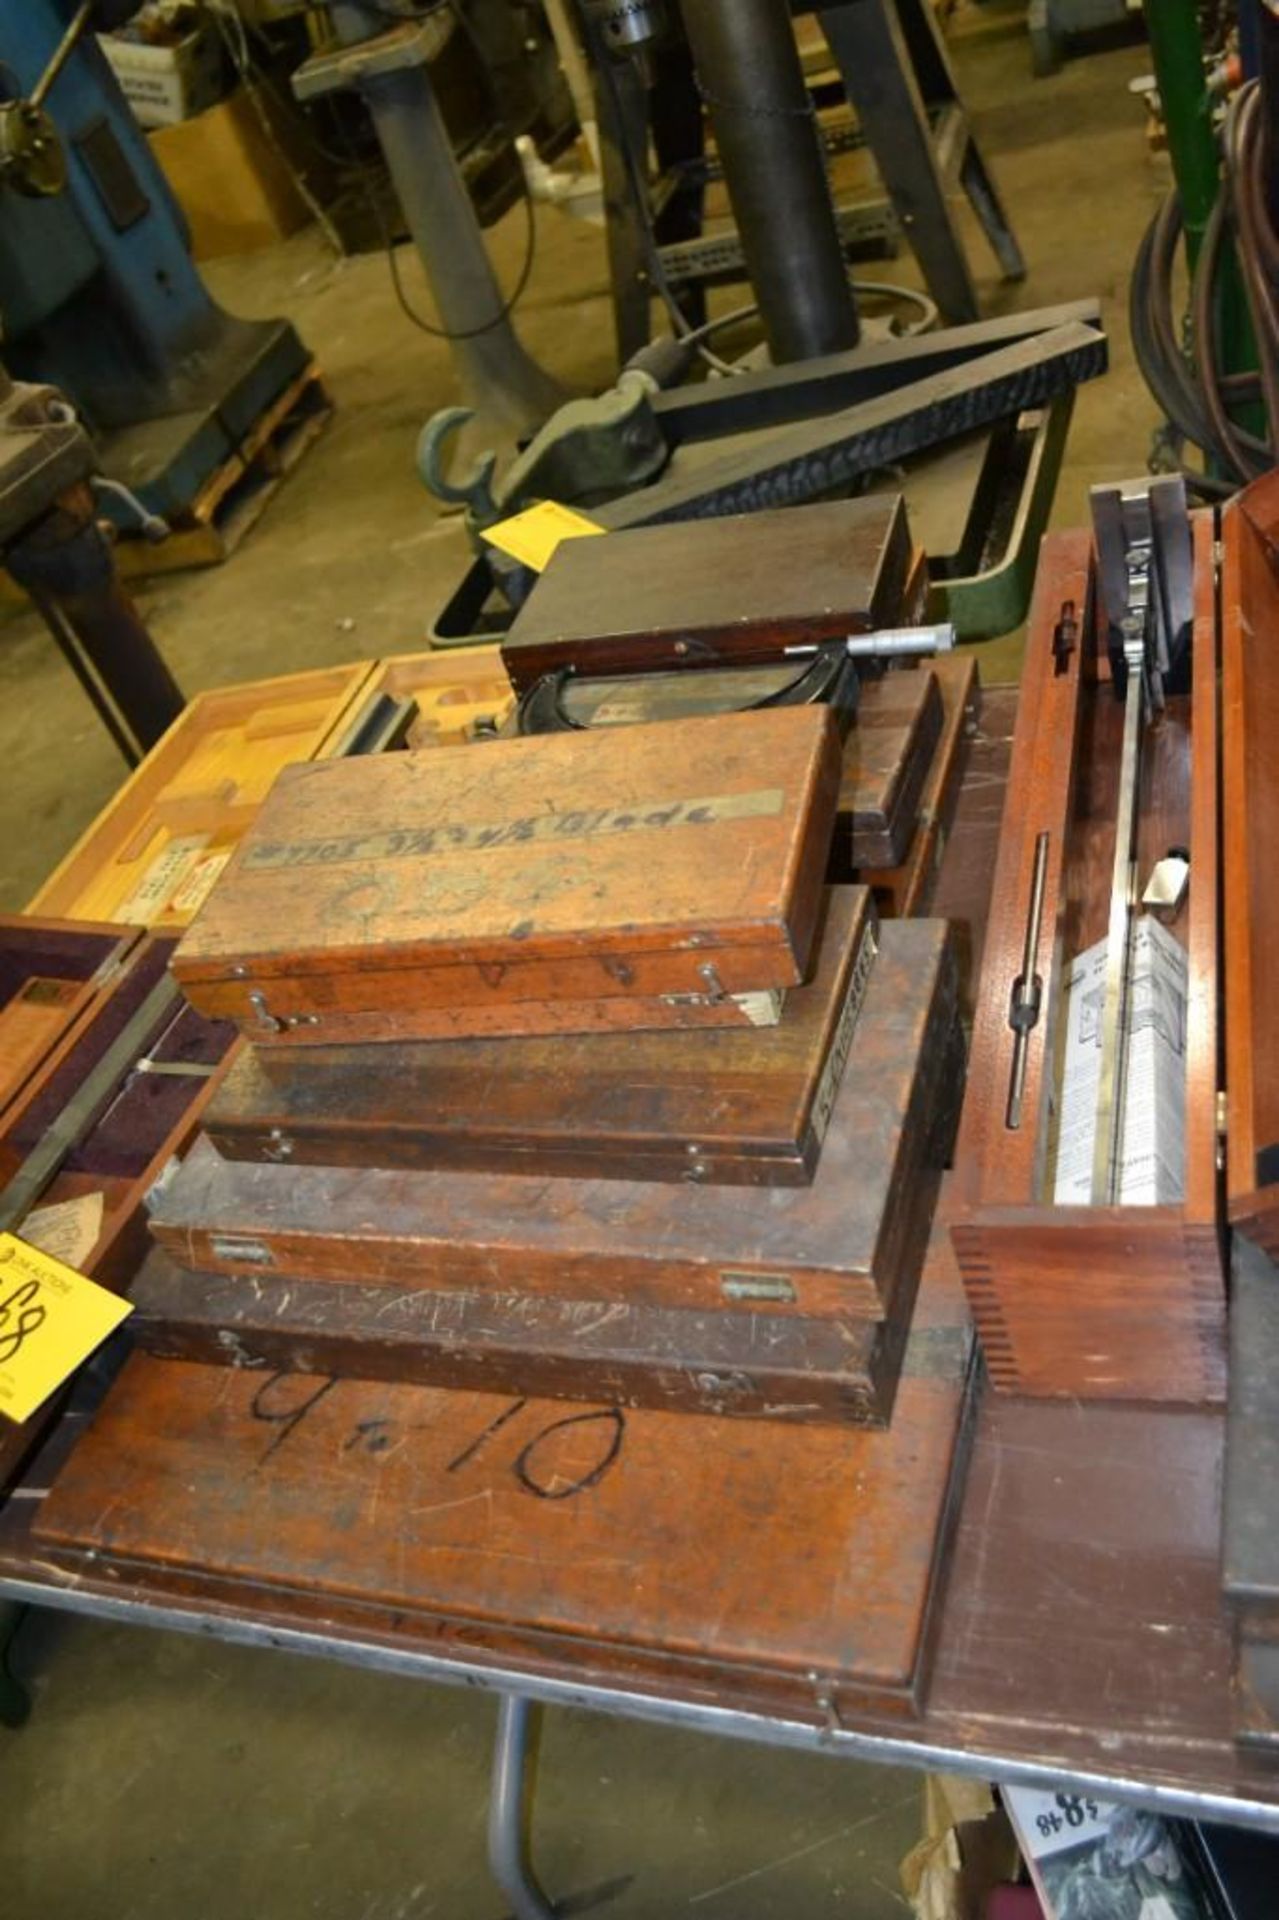 Lot Assorted Calipers and Micrometers in Wood Cases - Image 3 of 4